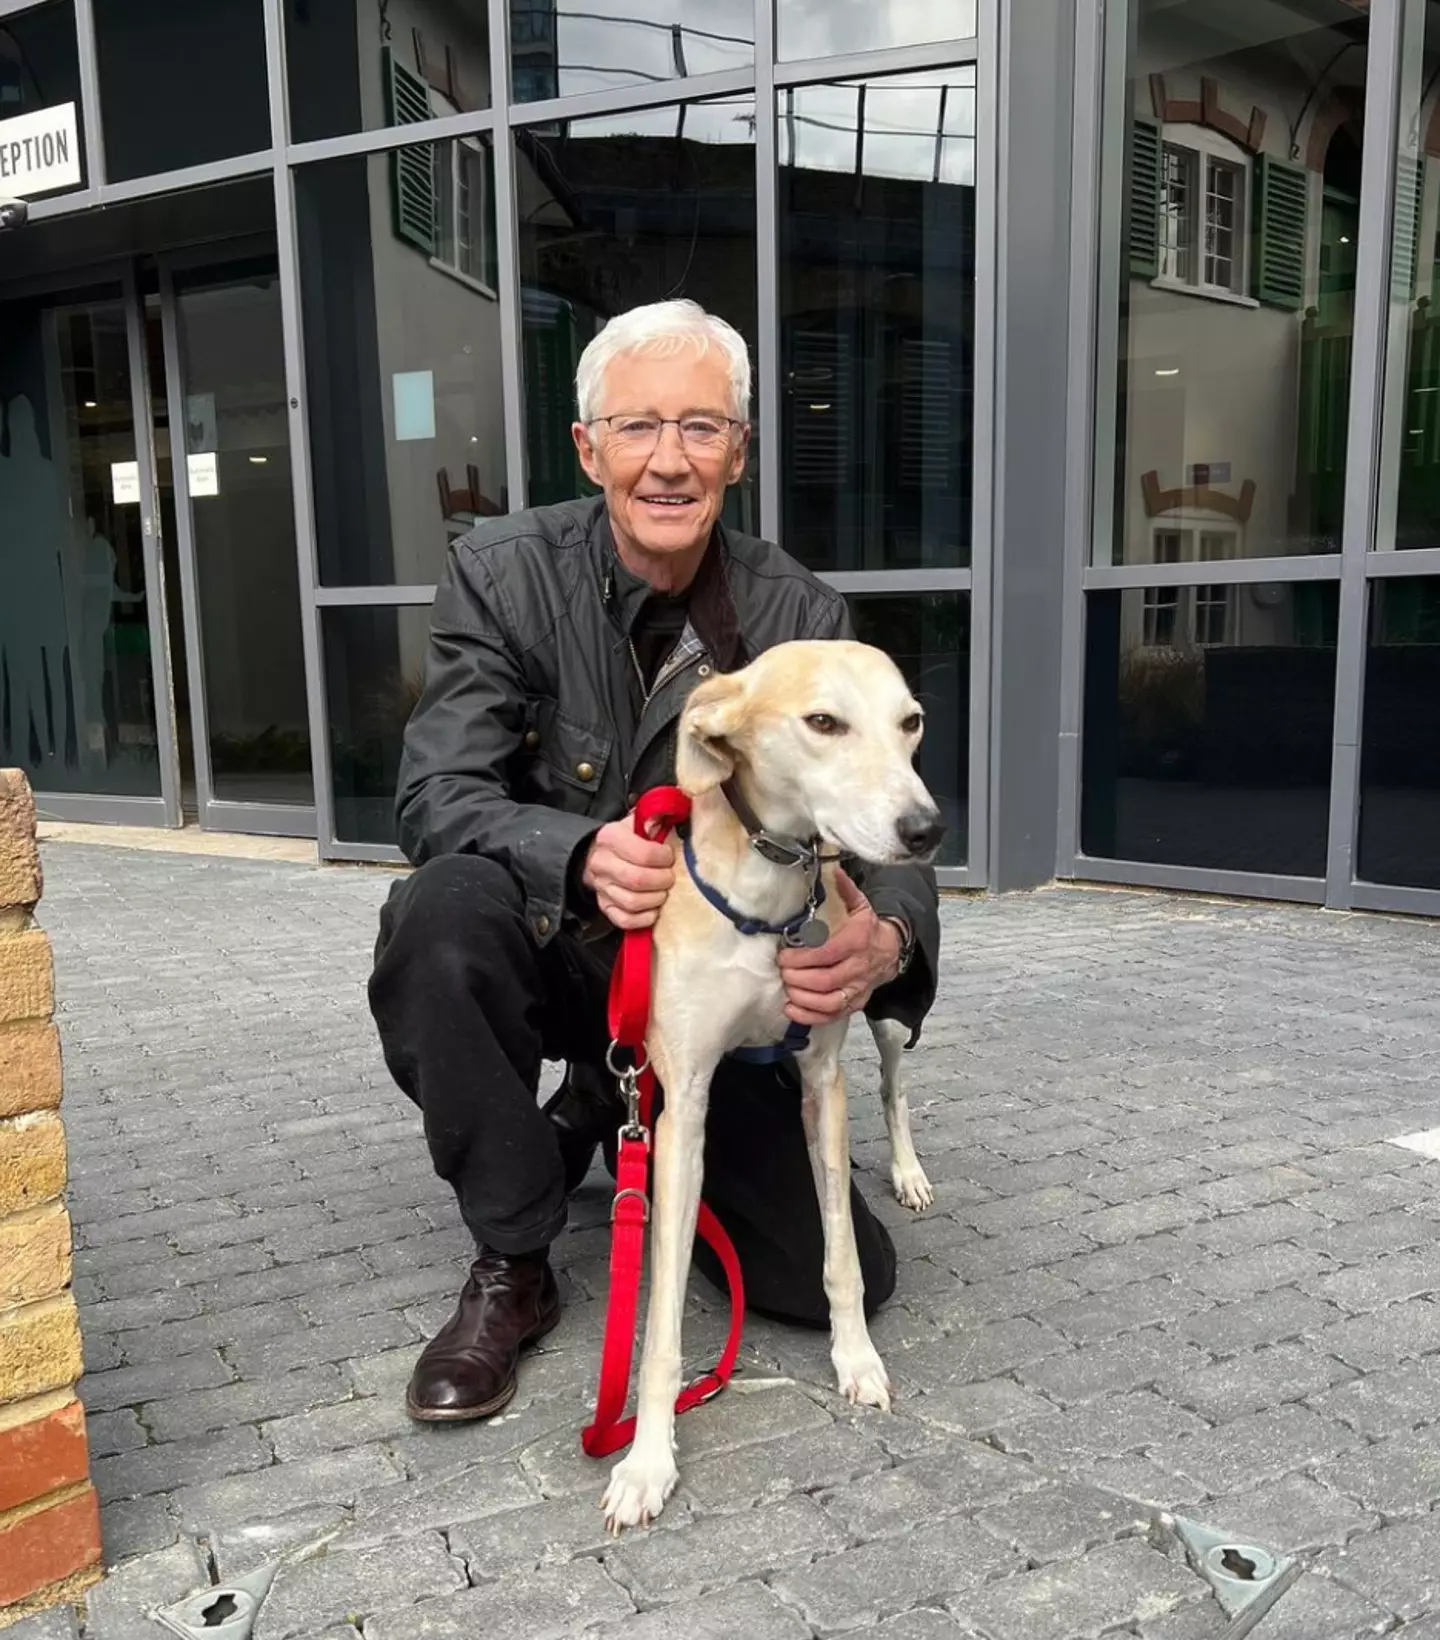 Paul O'Grady sadly and unexpectedly died at the age of 67.